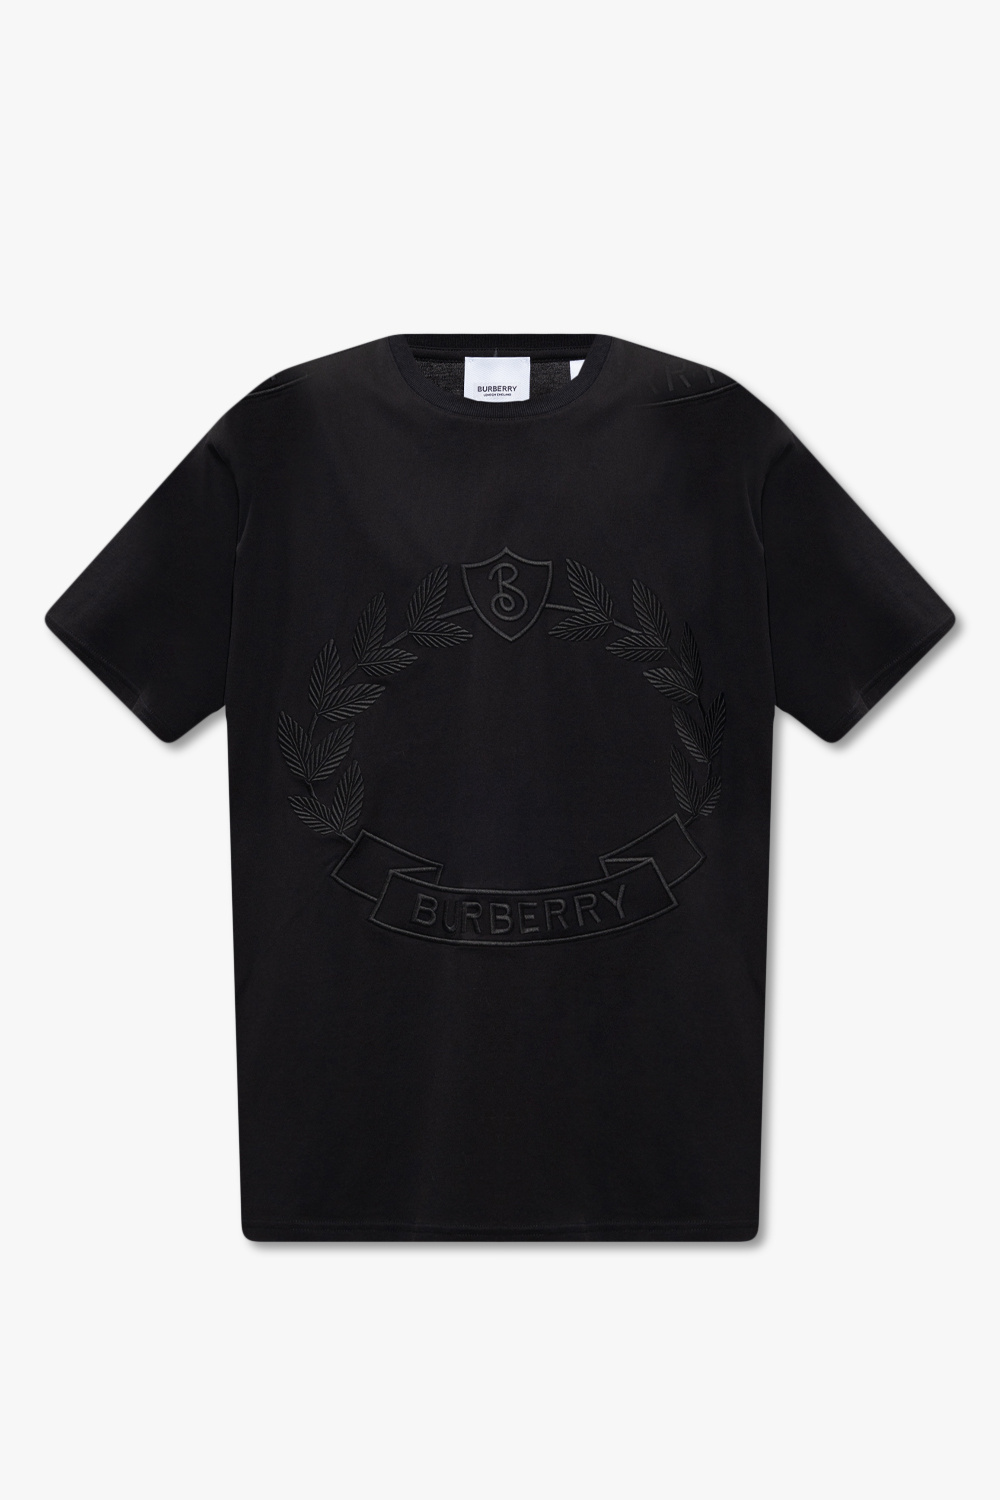 Black 'Anerley' T - shirt Burberry - GenesinlifeShops Canada - Burberry  spring 22 runway collection